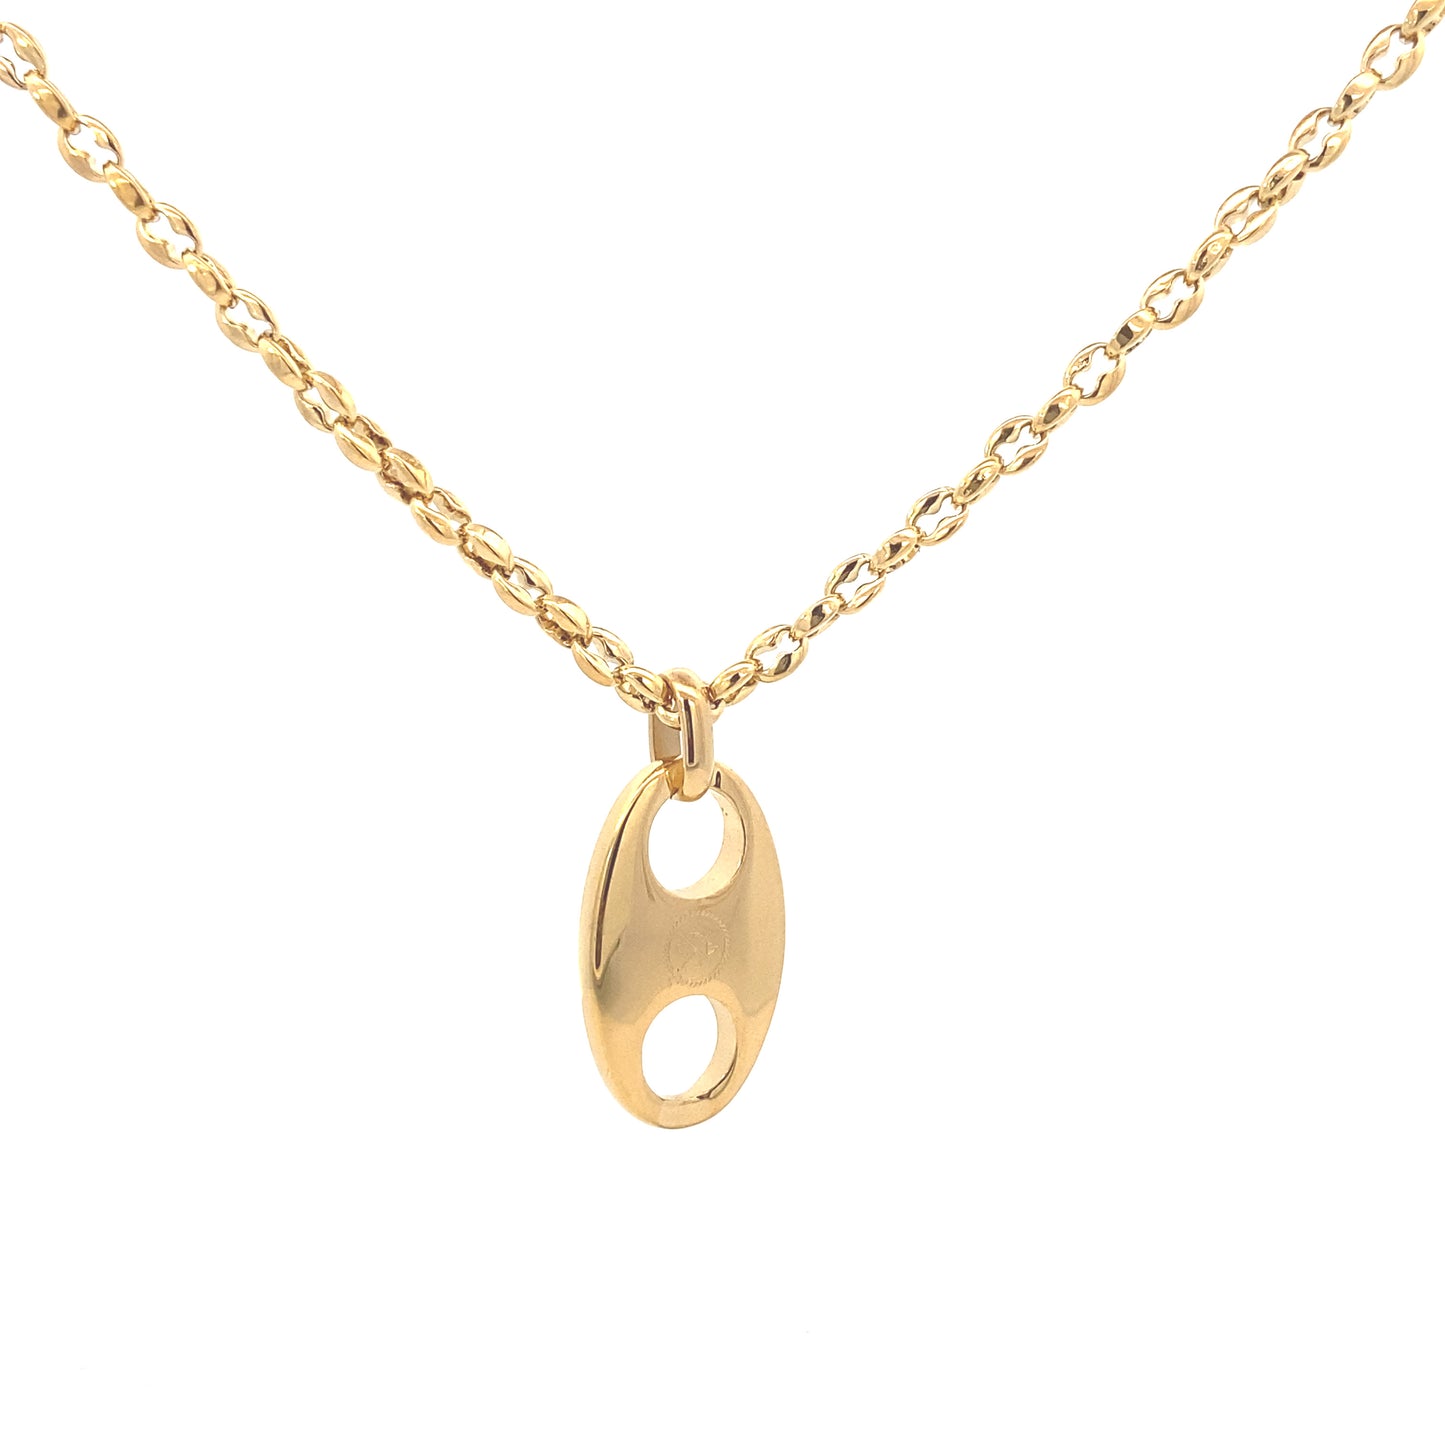 Mariner Chain w Mariner Link Pendant Gold | Seaknots | Luby 